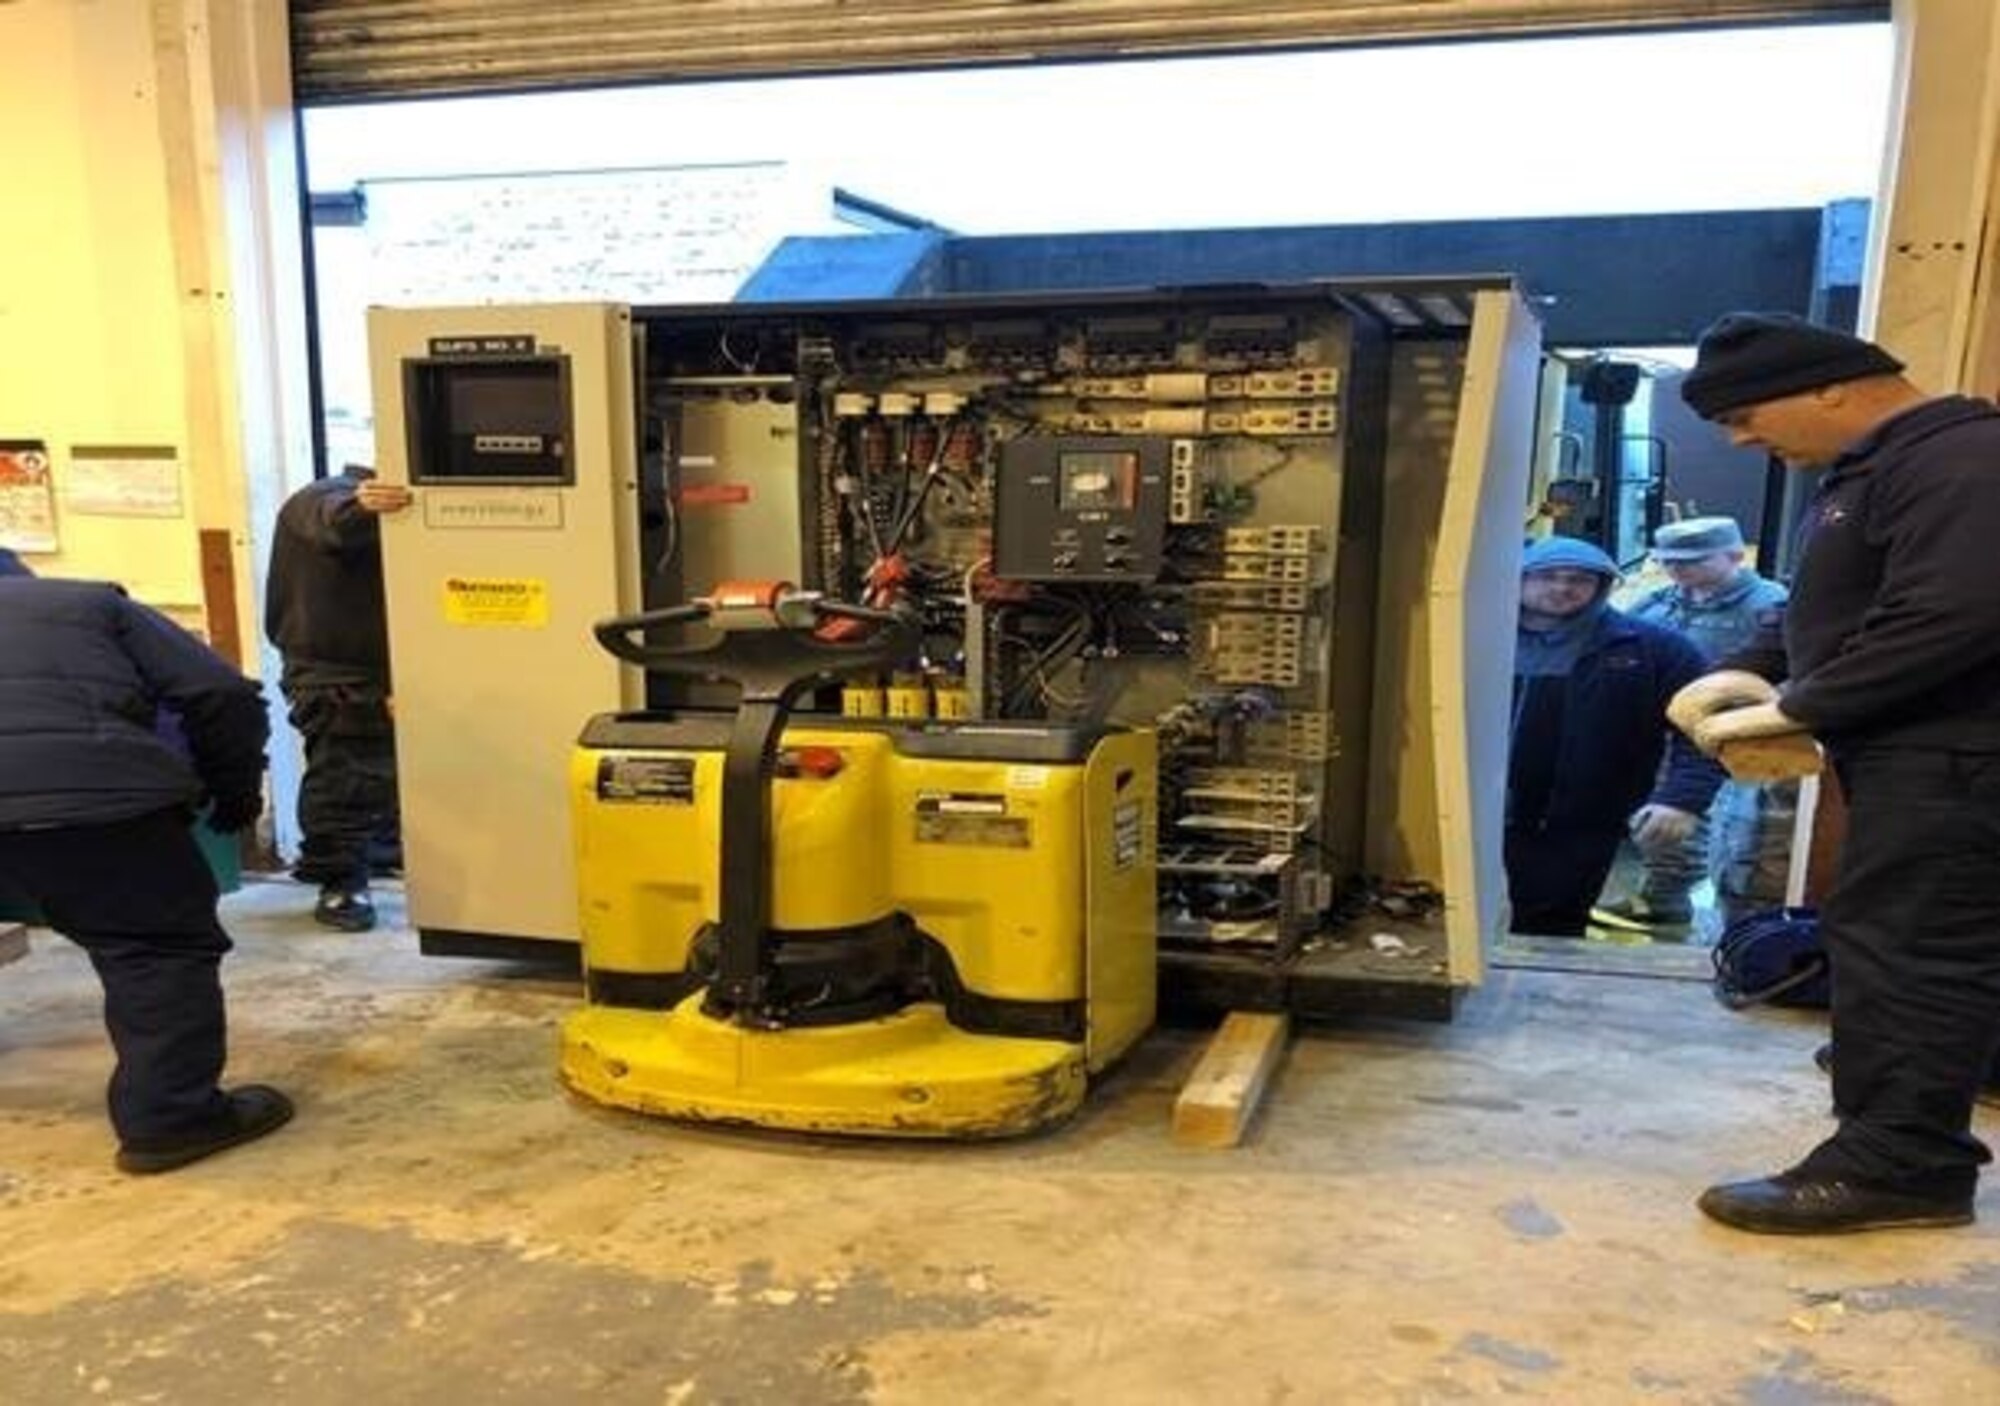 Airmen and civilian personnel from the 422nd Communications and Civil Engineer Squadrons, place a B31 Uninterruptable Power System on a forklift, Nov.14, 2019, at RAF Croughton, England. The B31 UPS helps power the 422nd CS technical control facility that serves as one of the main hubs of communication across 5 MAJCOMS. (Courtesy Photo)